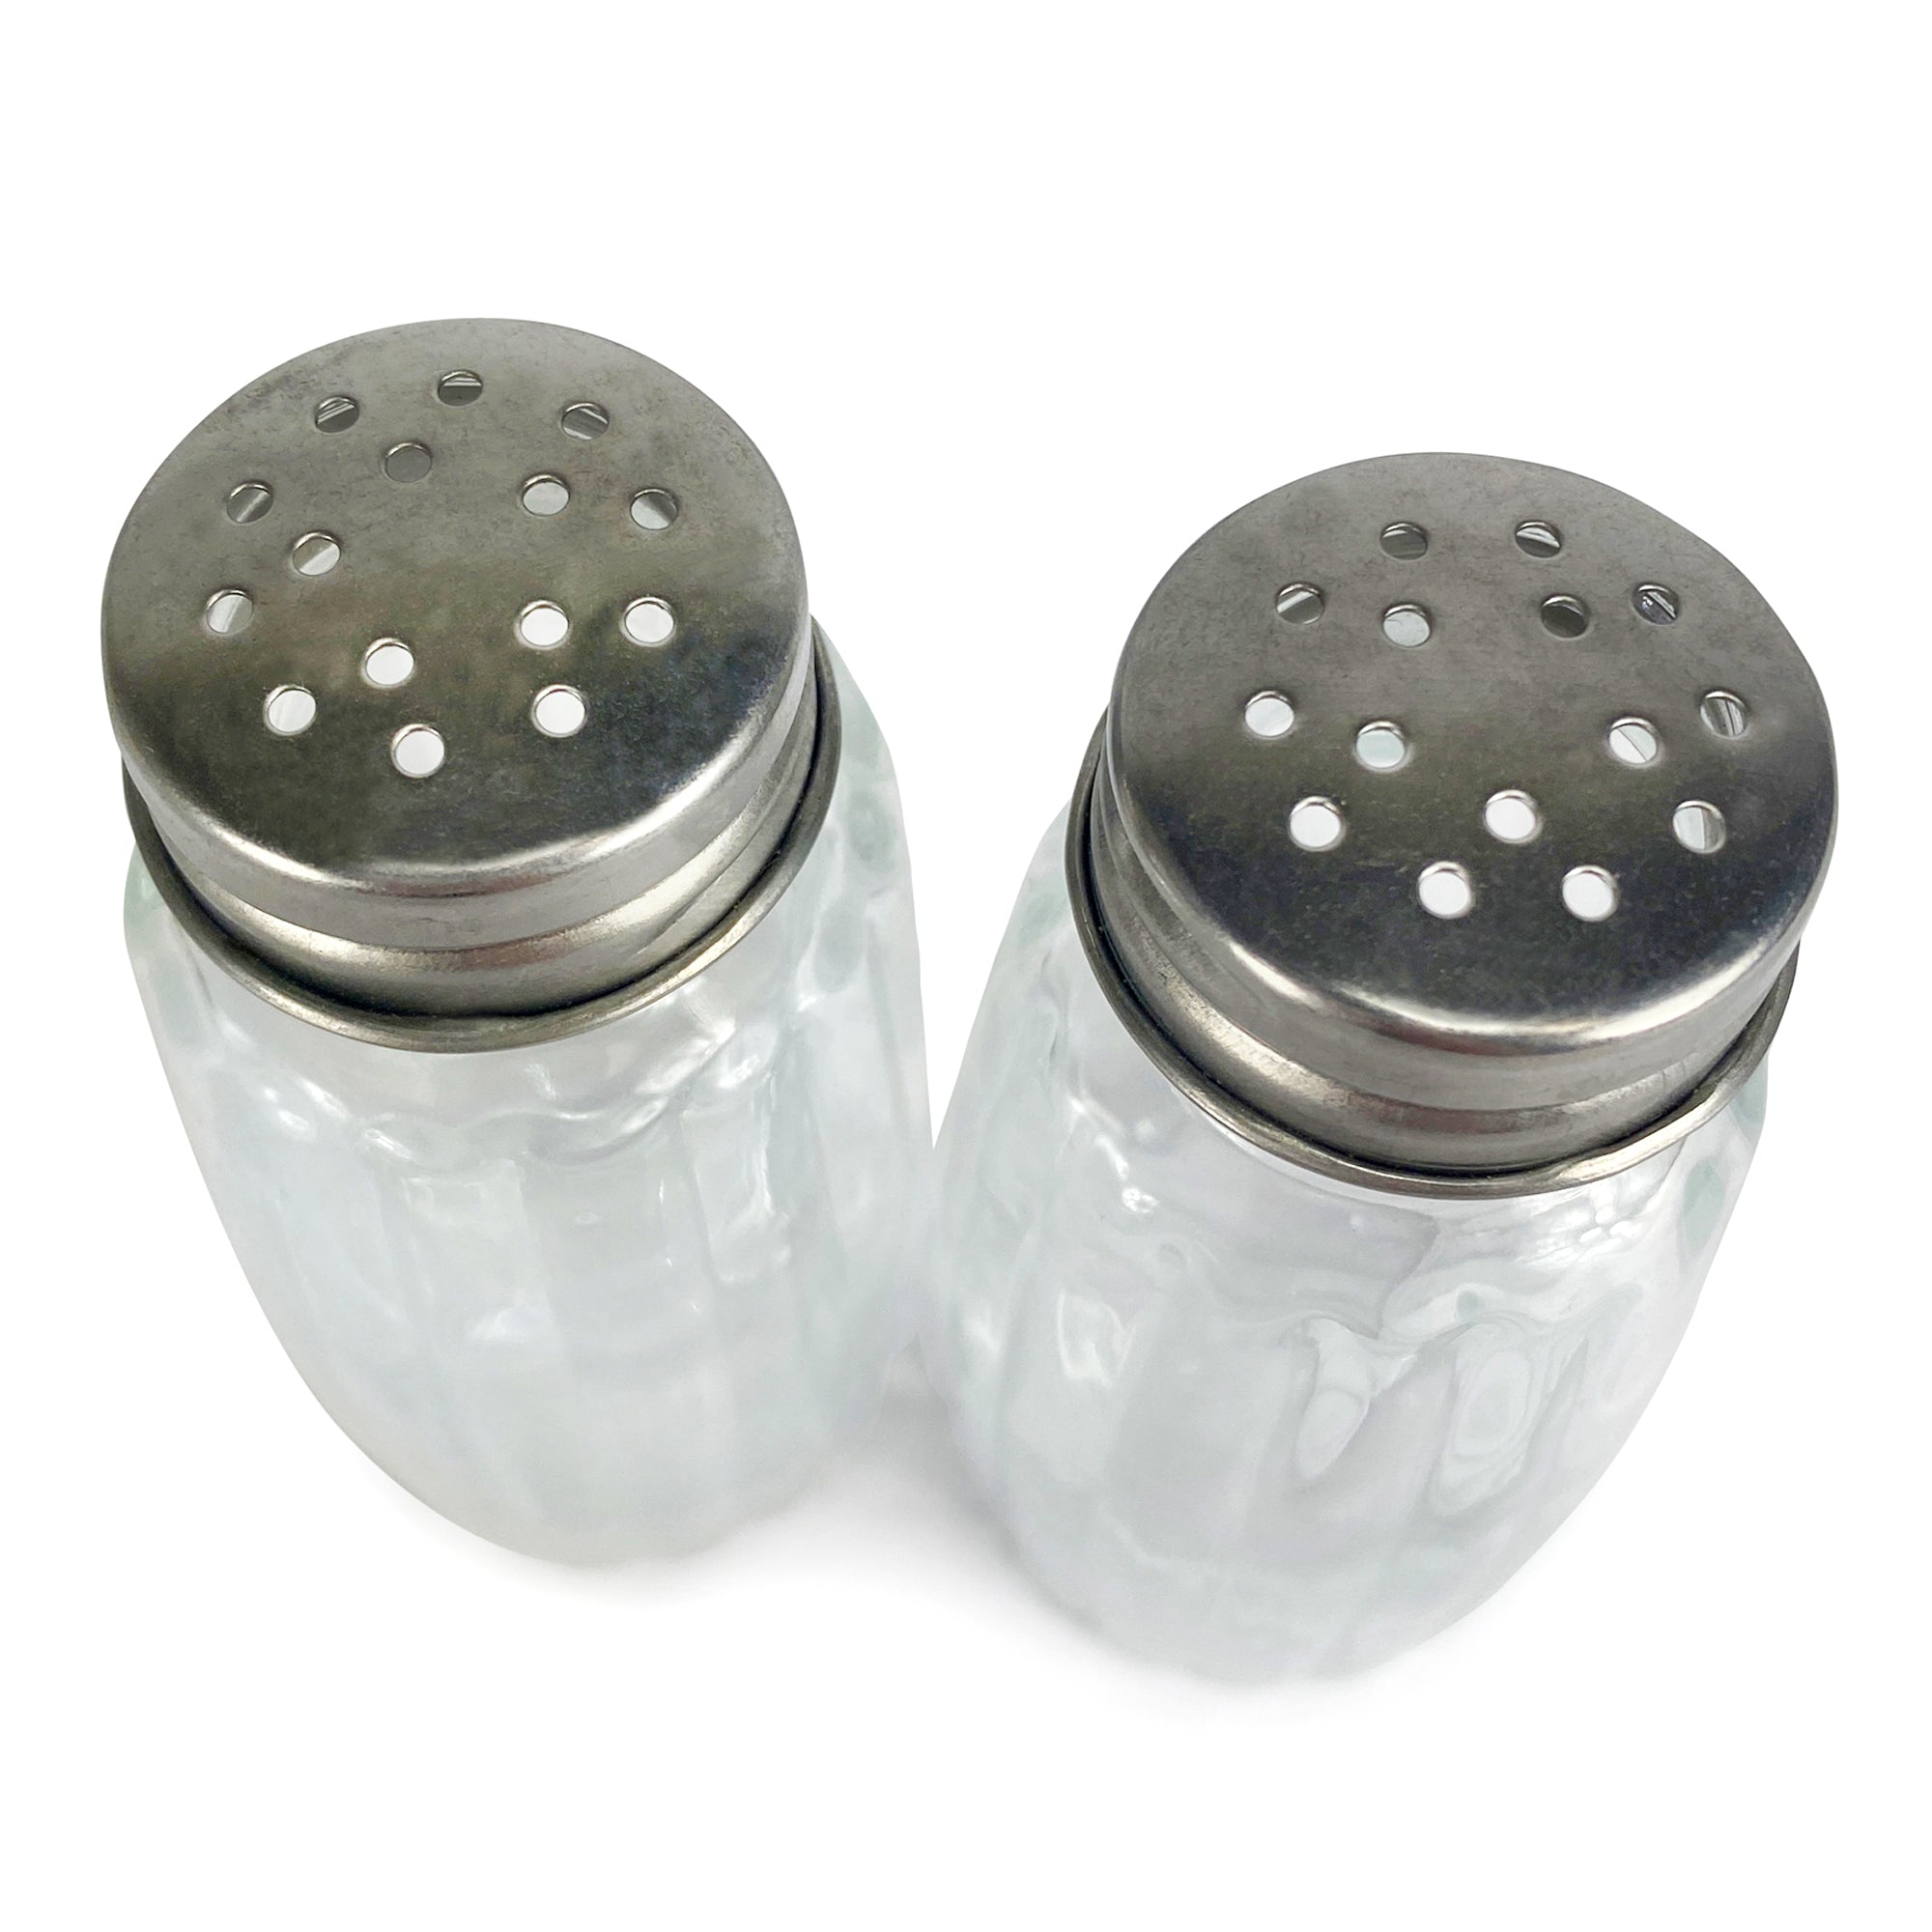 Salt and Pepper Shakers - Smokey Friends & Nature